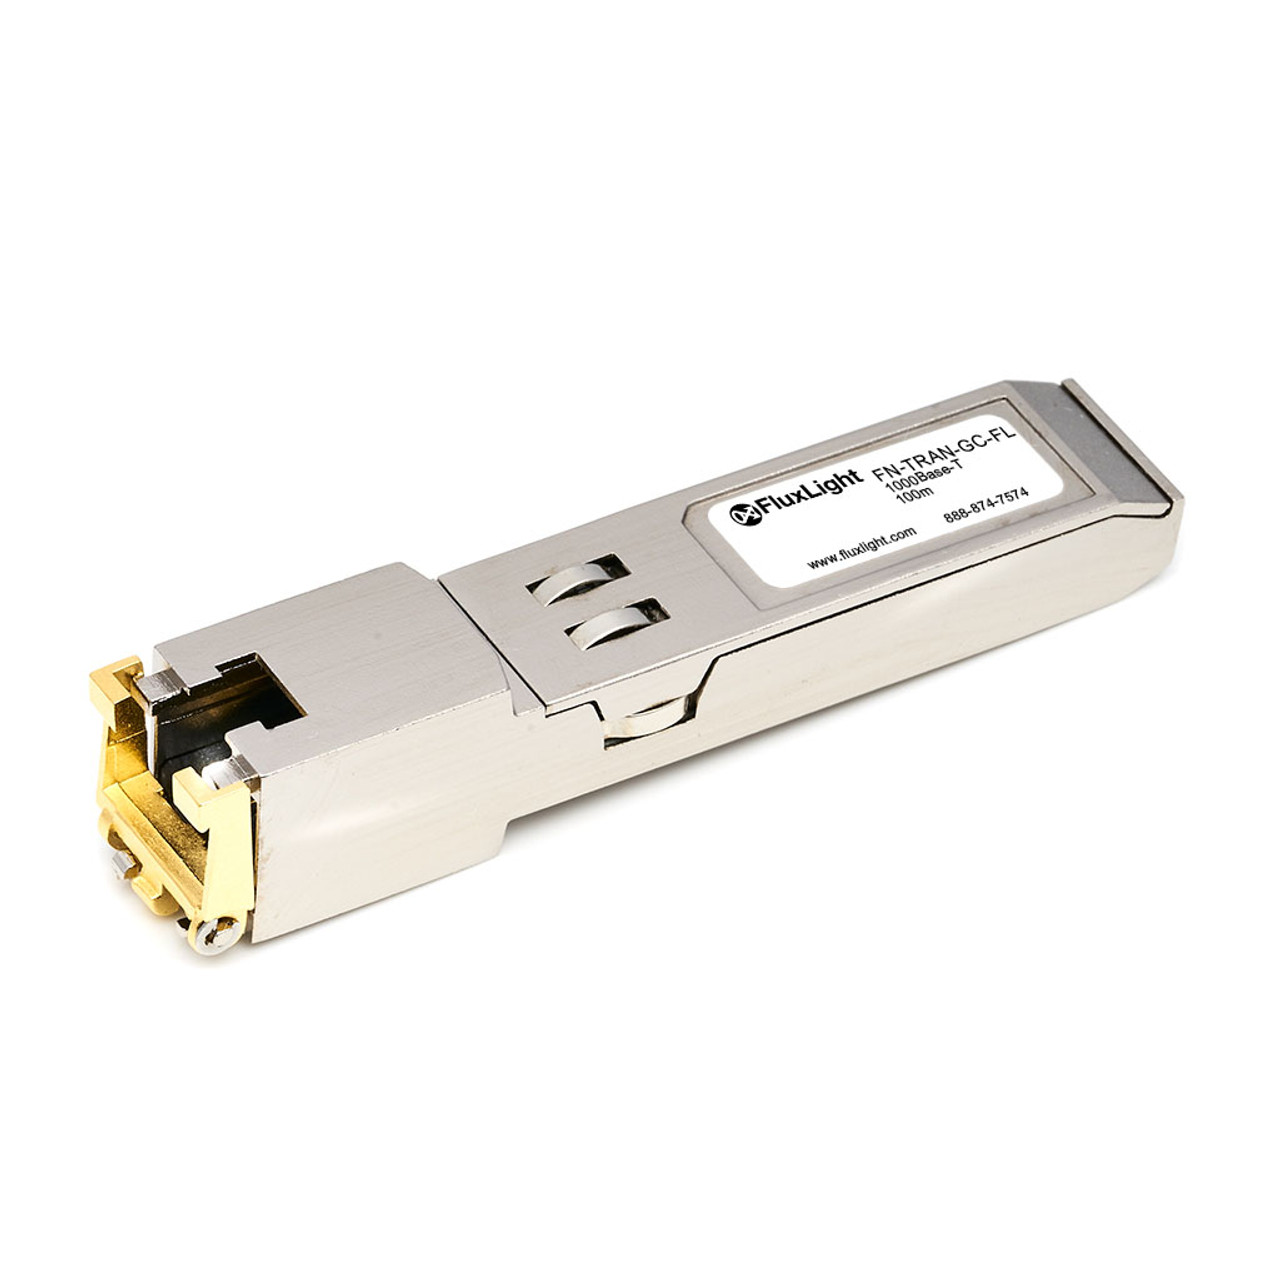 1Ge Sfp Rj45 Transceiver Module For Systems With Sfp And SfpSfp Slots - FN-TRAN-GC